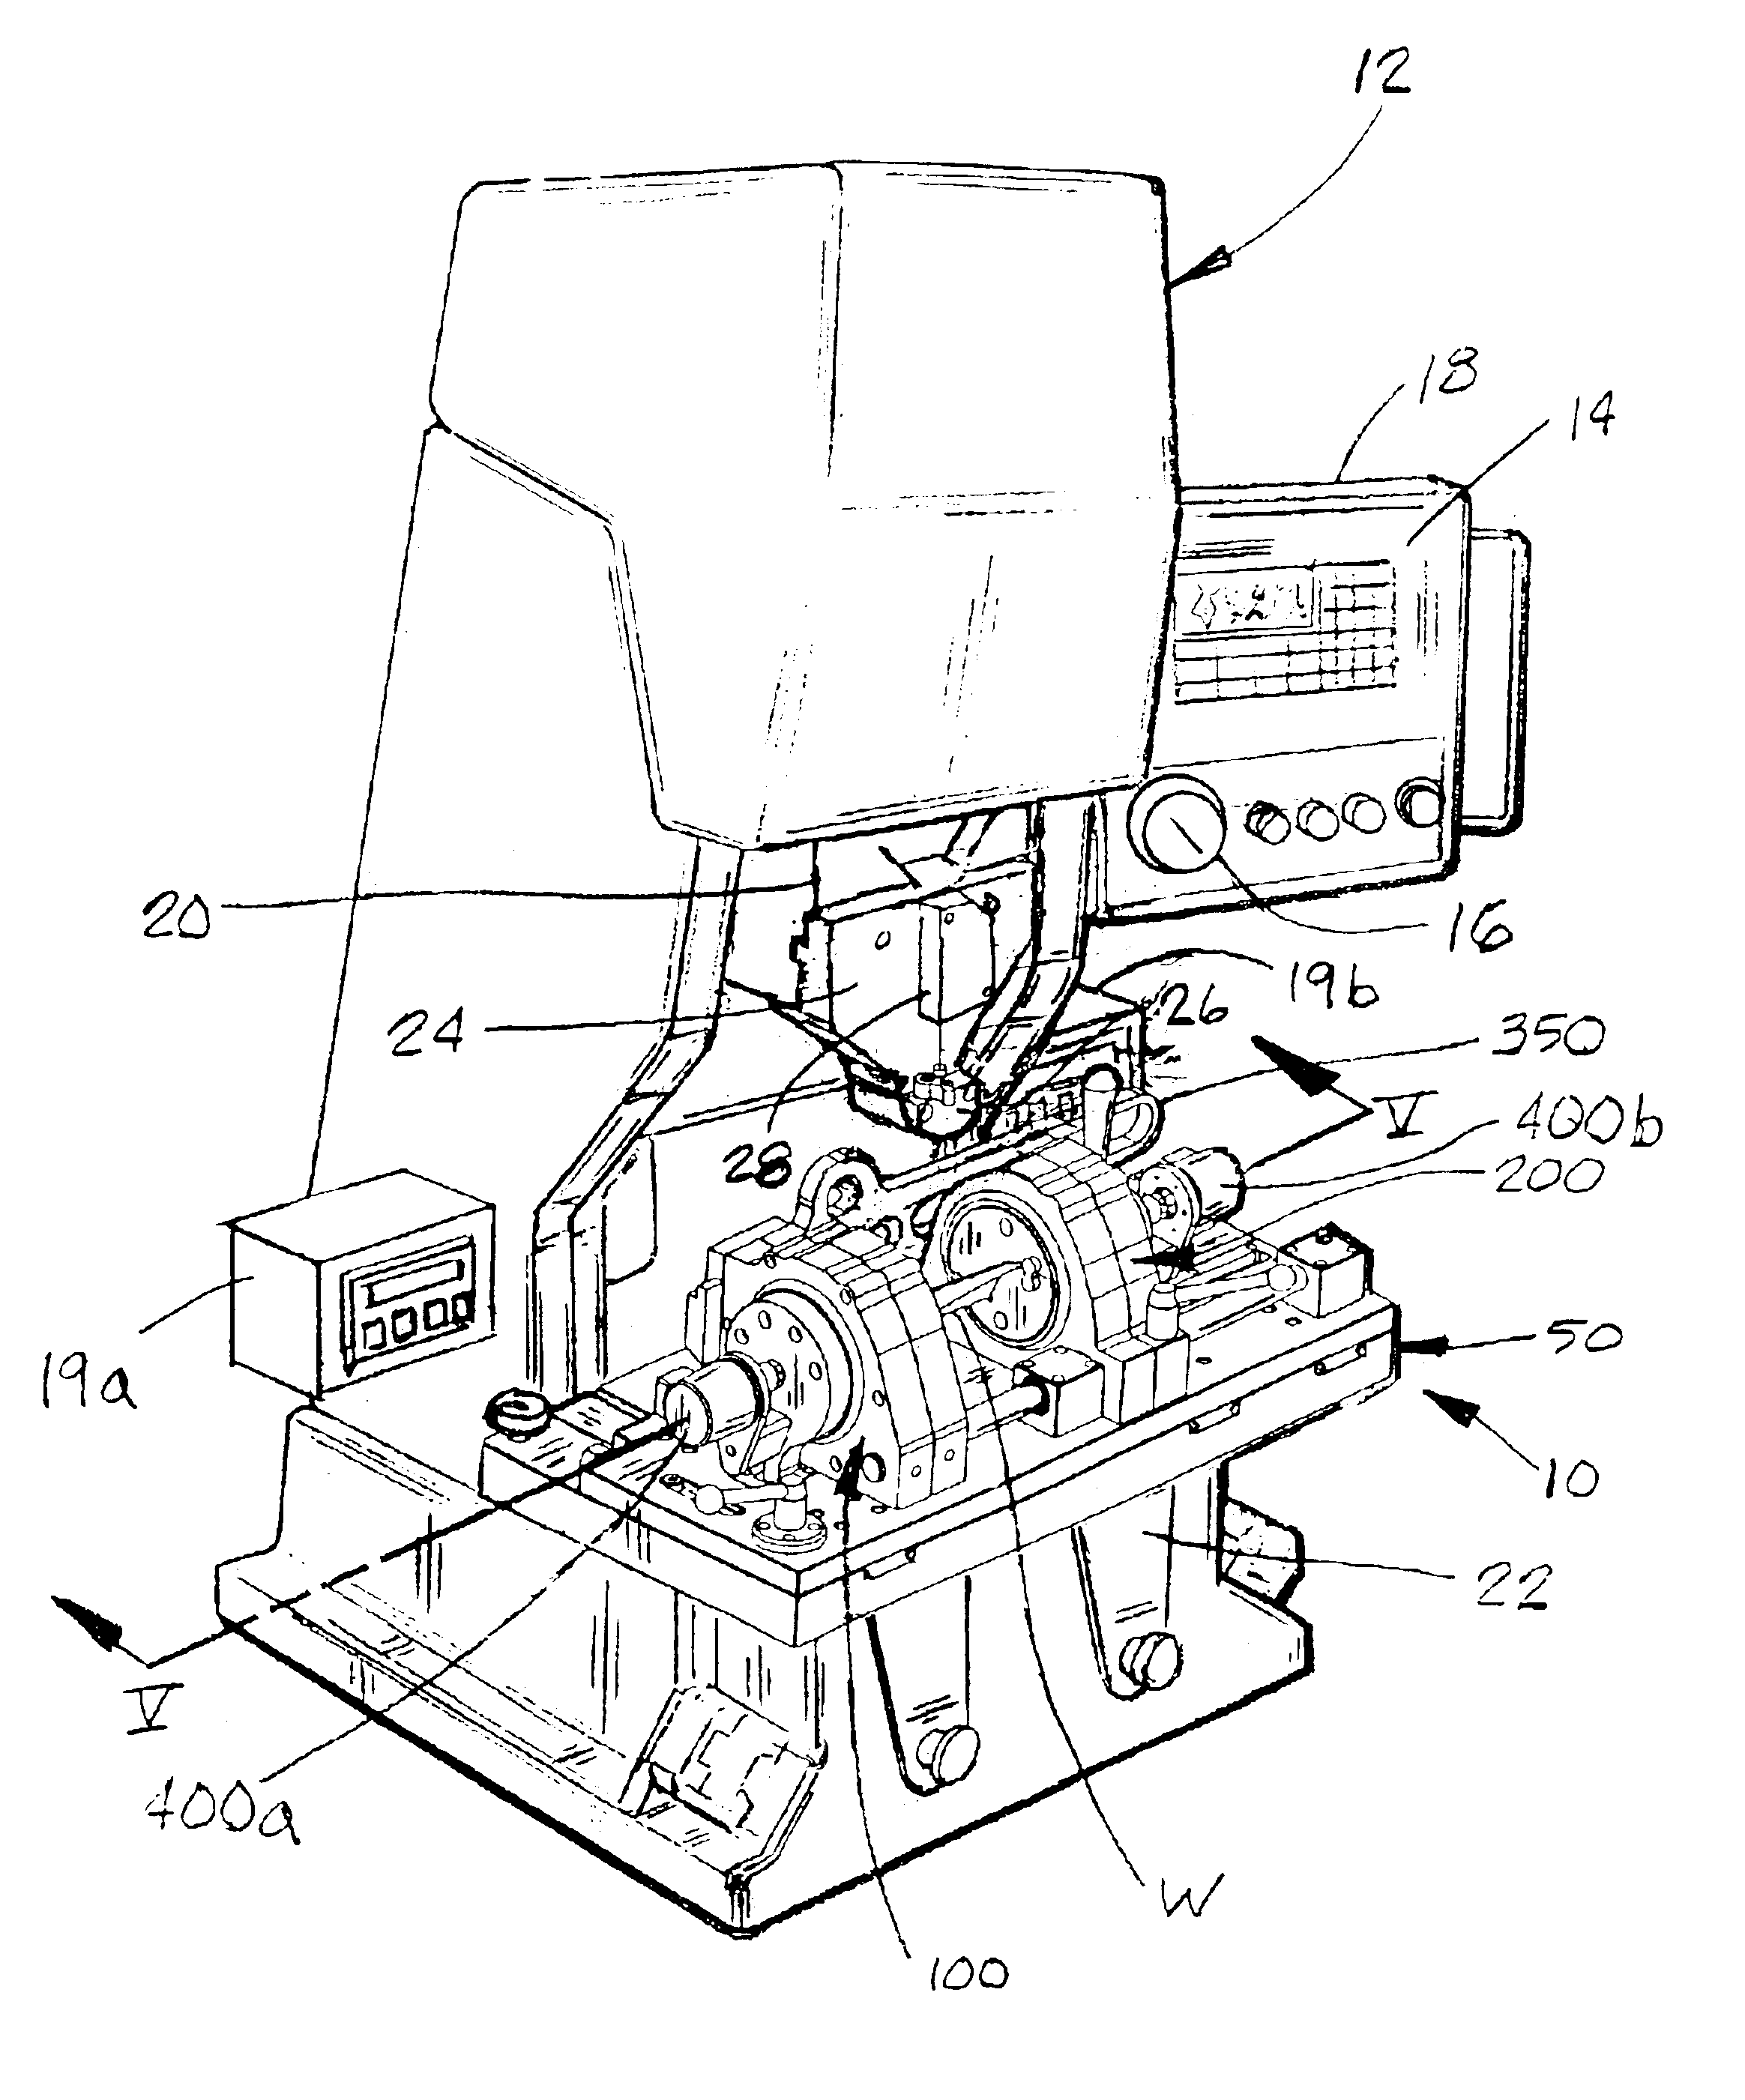 Fixture for holding metals parts for bending or twist correction